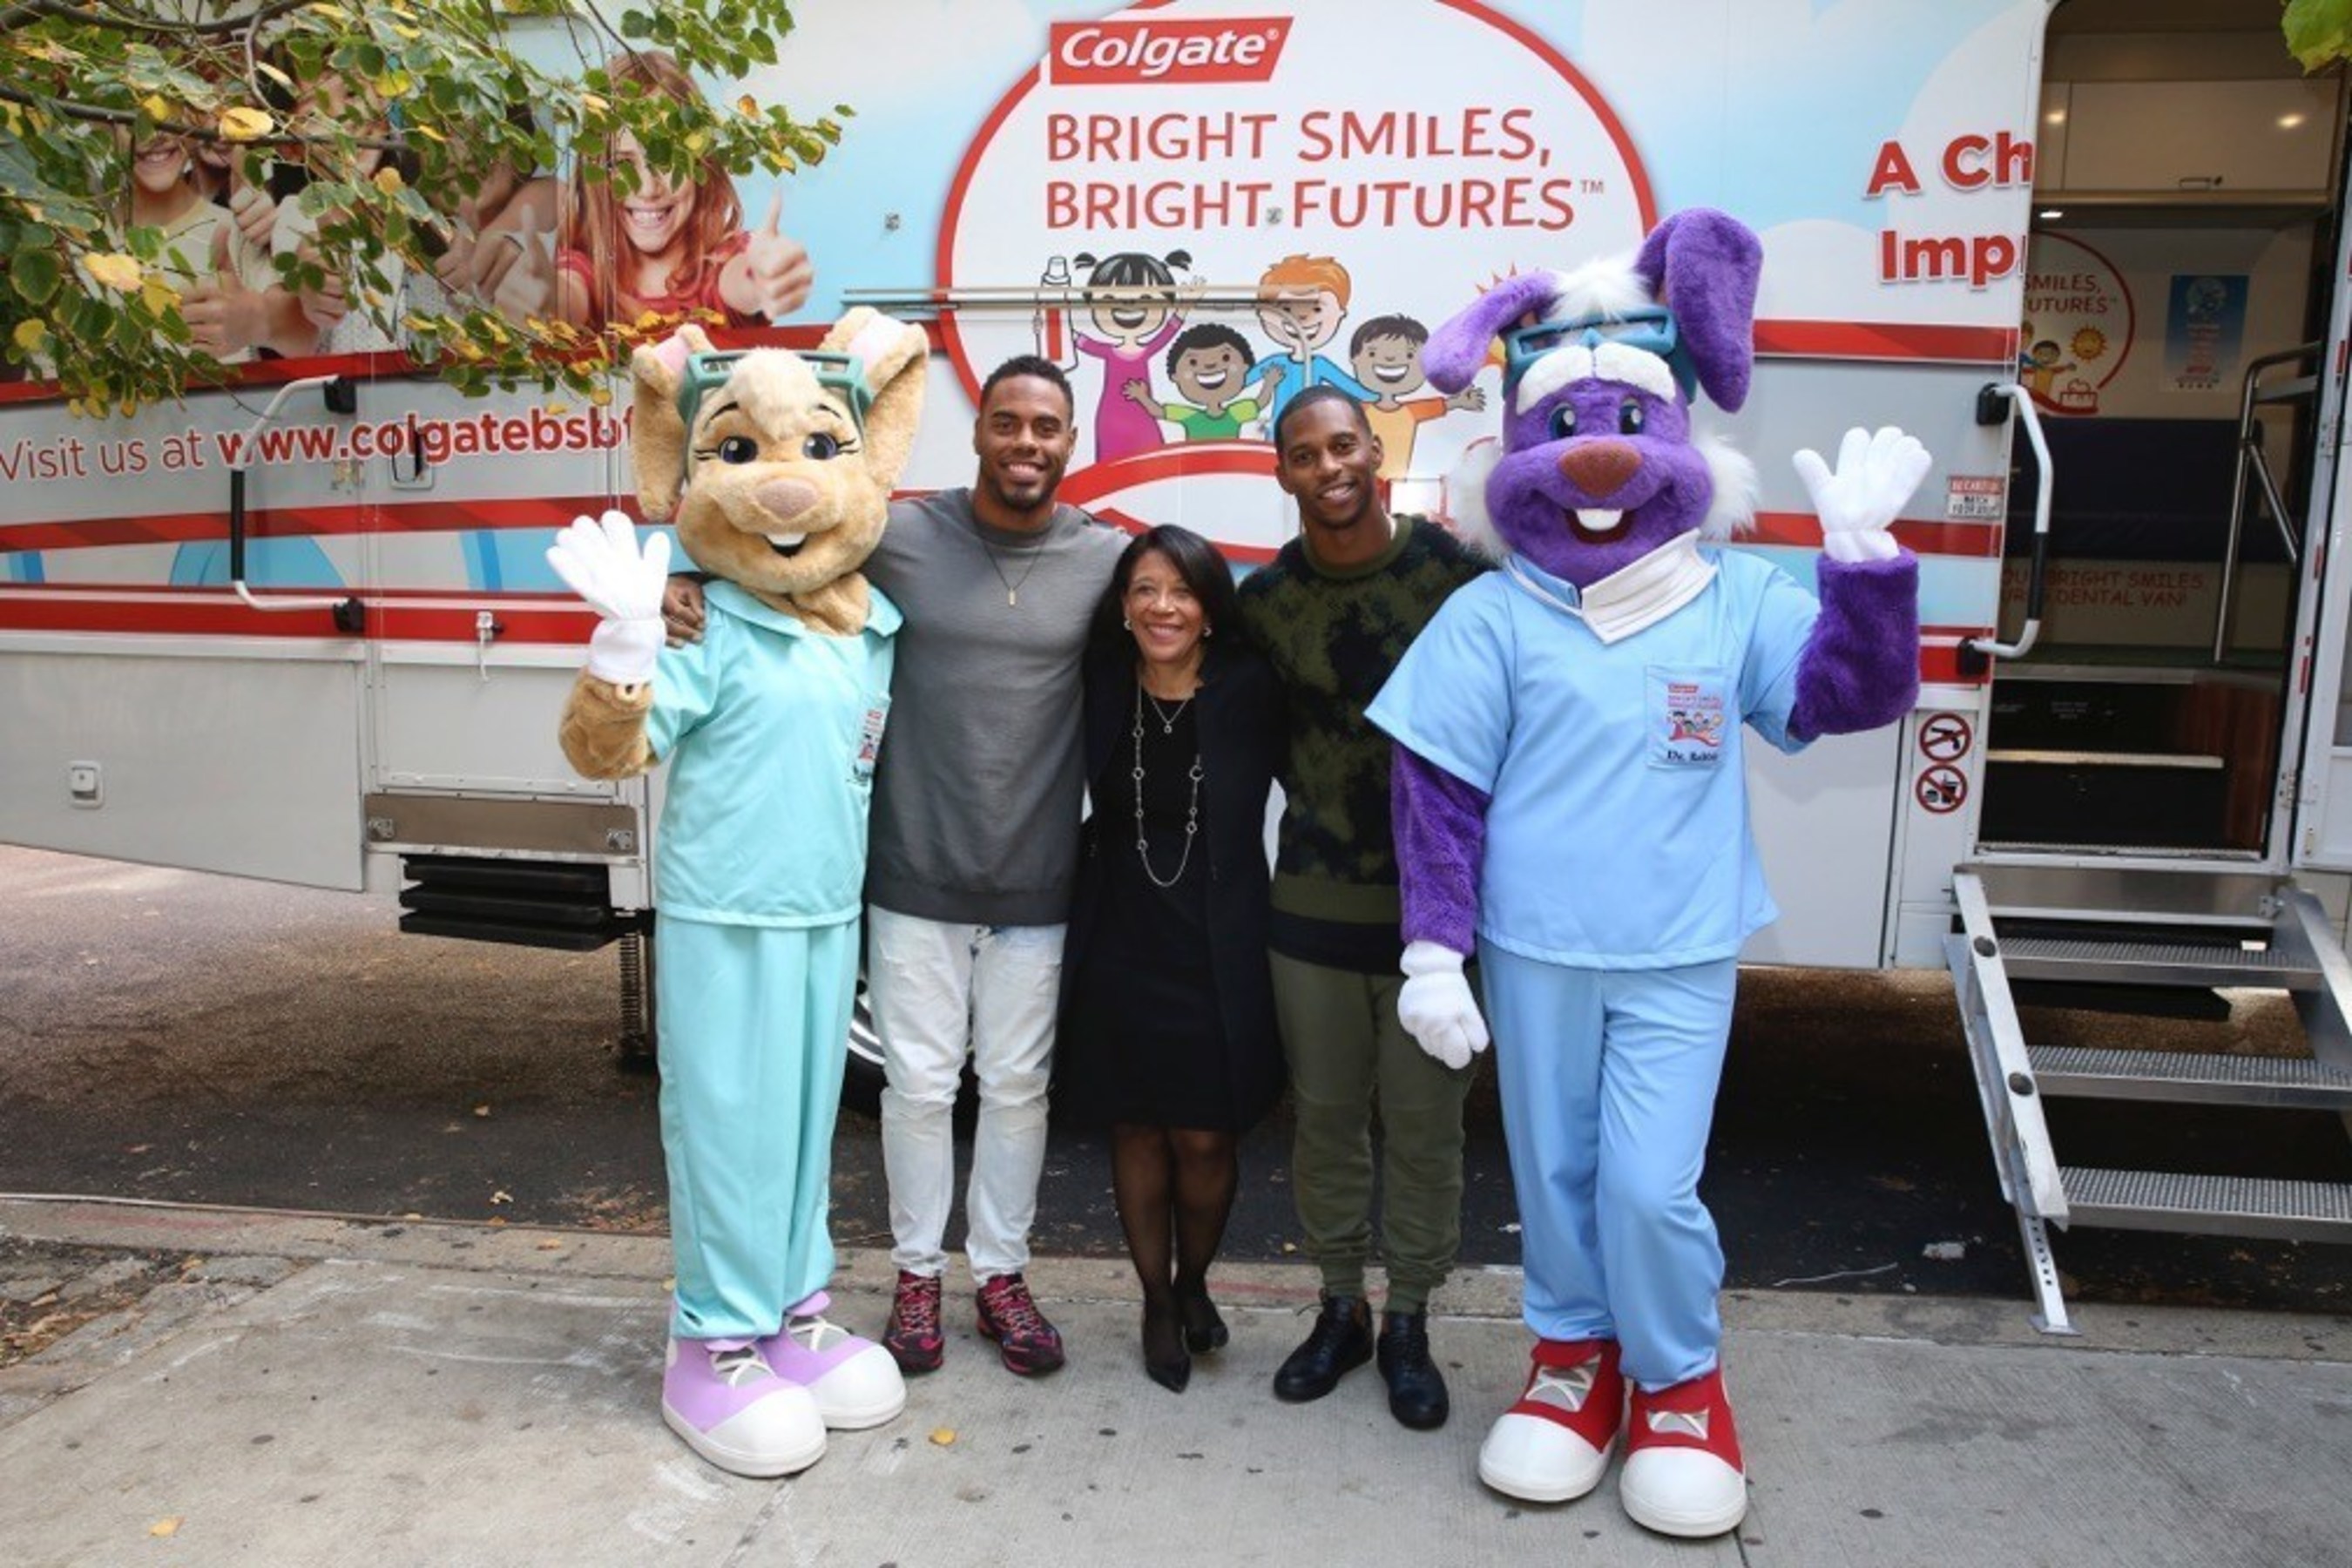 New York Giants  Rashad Jennings (2nd left) and Victor Cruz (2nd right) join Dr. Marsha Butler (center), Vice President, Global Oral Health, Colgate-Palmolive Company, and Colgate mascots, Dr. Brushwell and Dr. Rabbit, in front of a Bright Smiles, Bright Futures (BSBF) mobile dental van during BSBF's 25th Anniversary celebration in New York City. (Mark Von Holden/AP Images for Colgate Bright Smiles, Bright Futures)